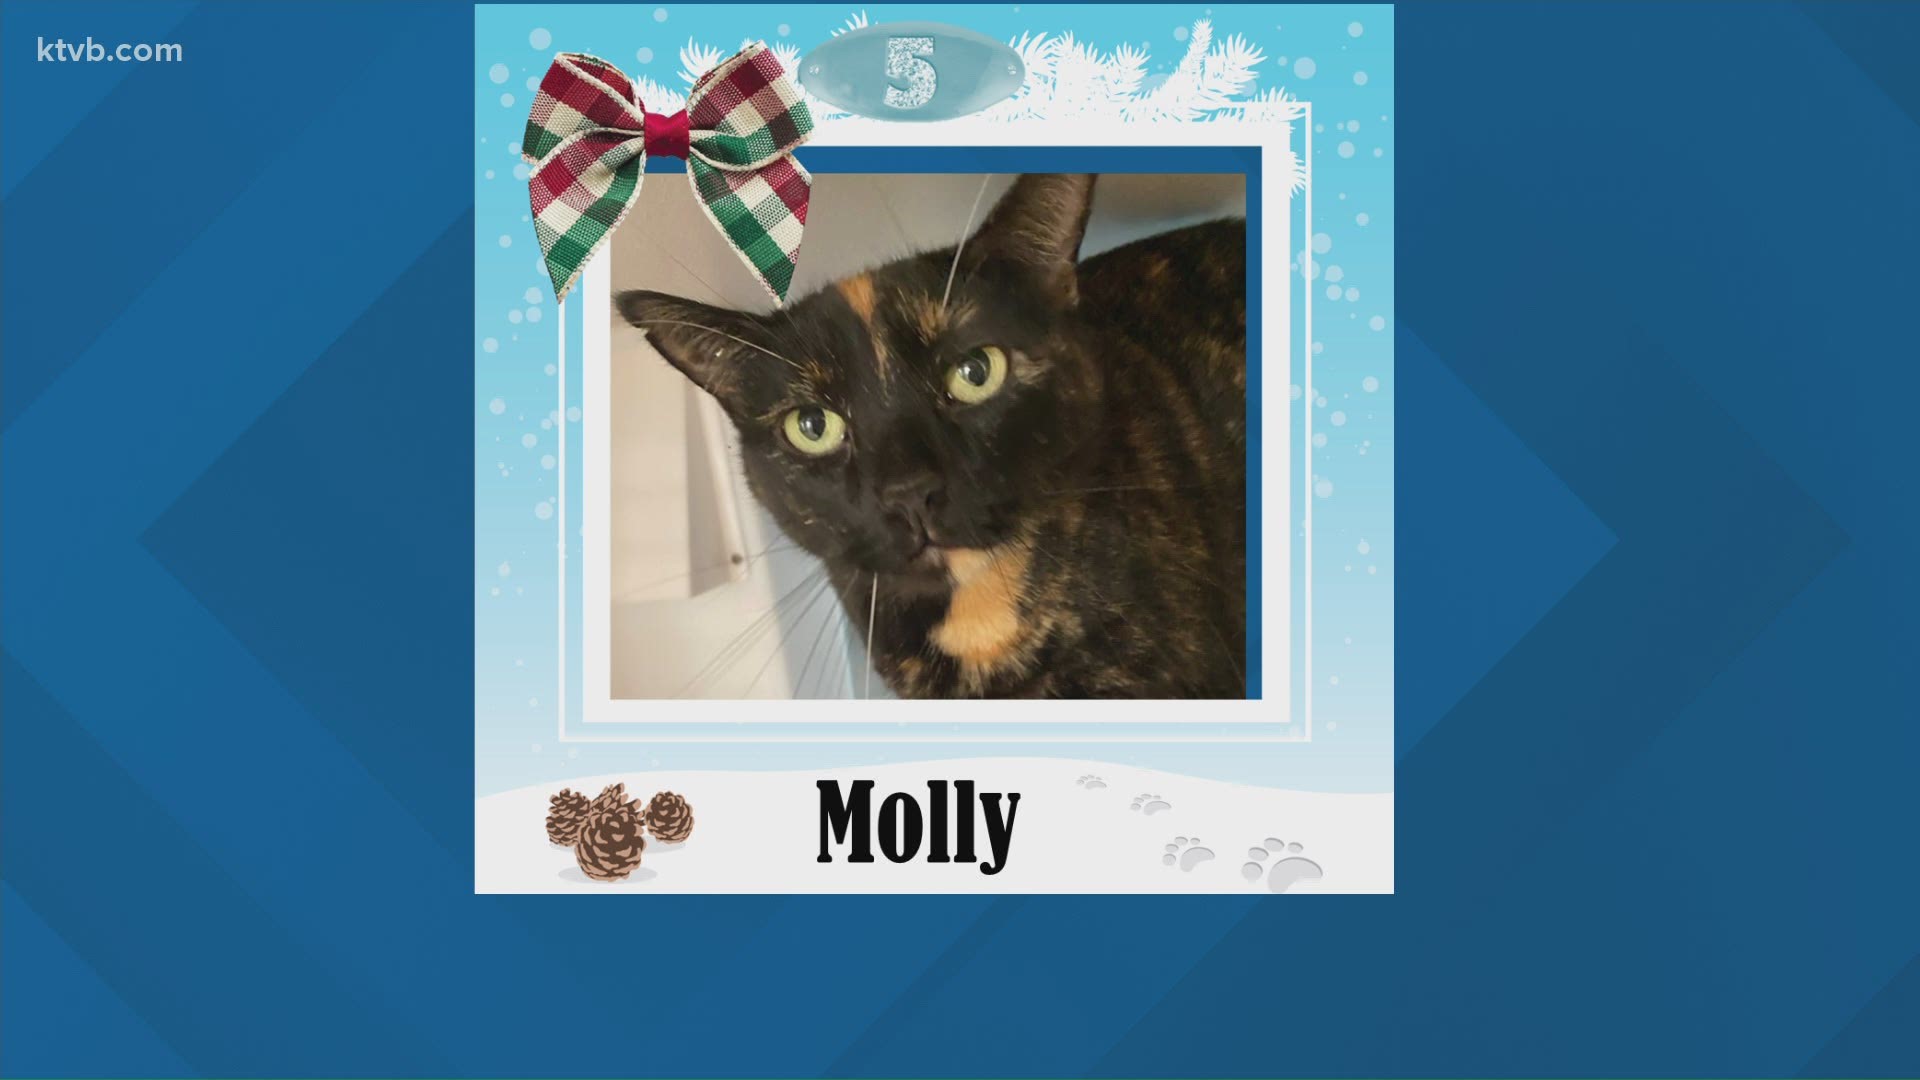 Molly is a cat in need of a home.